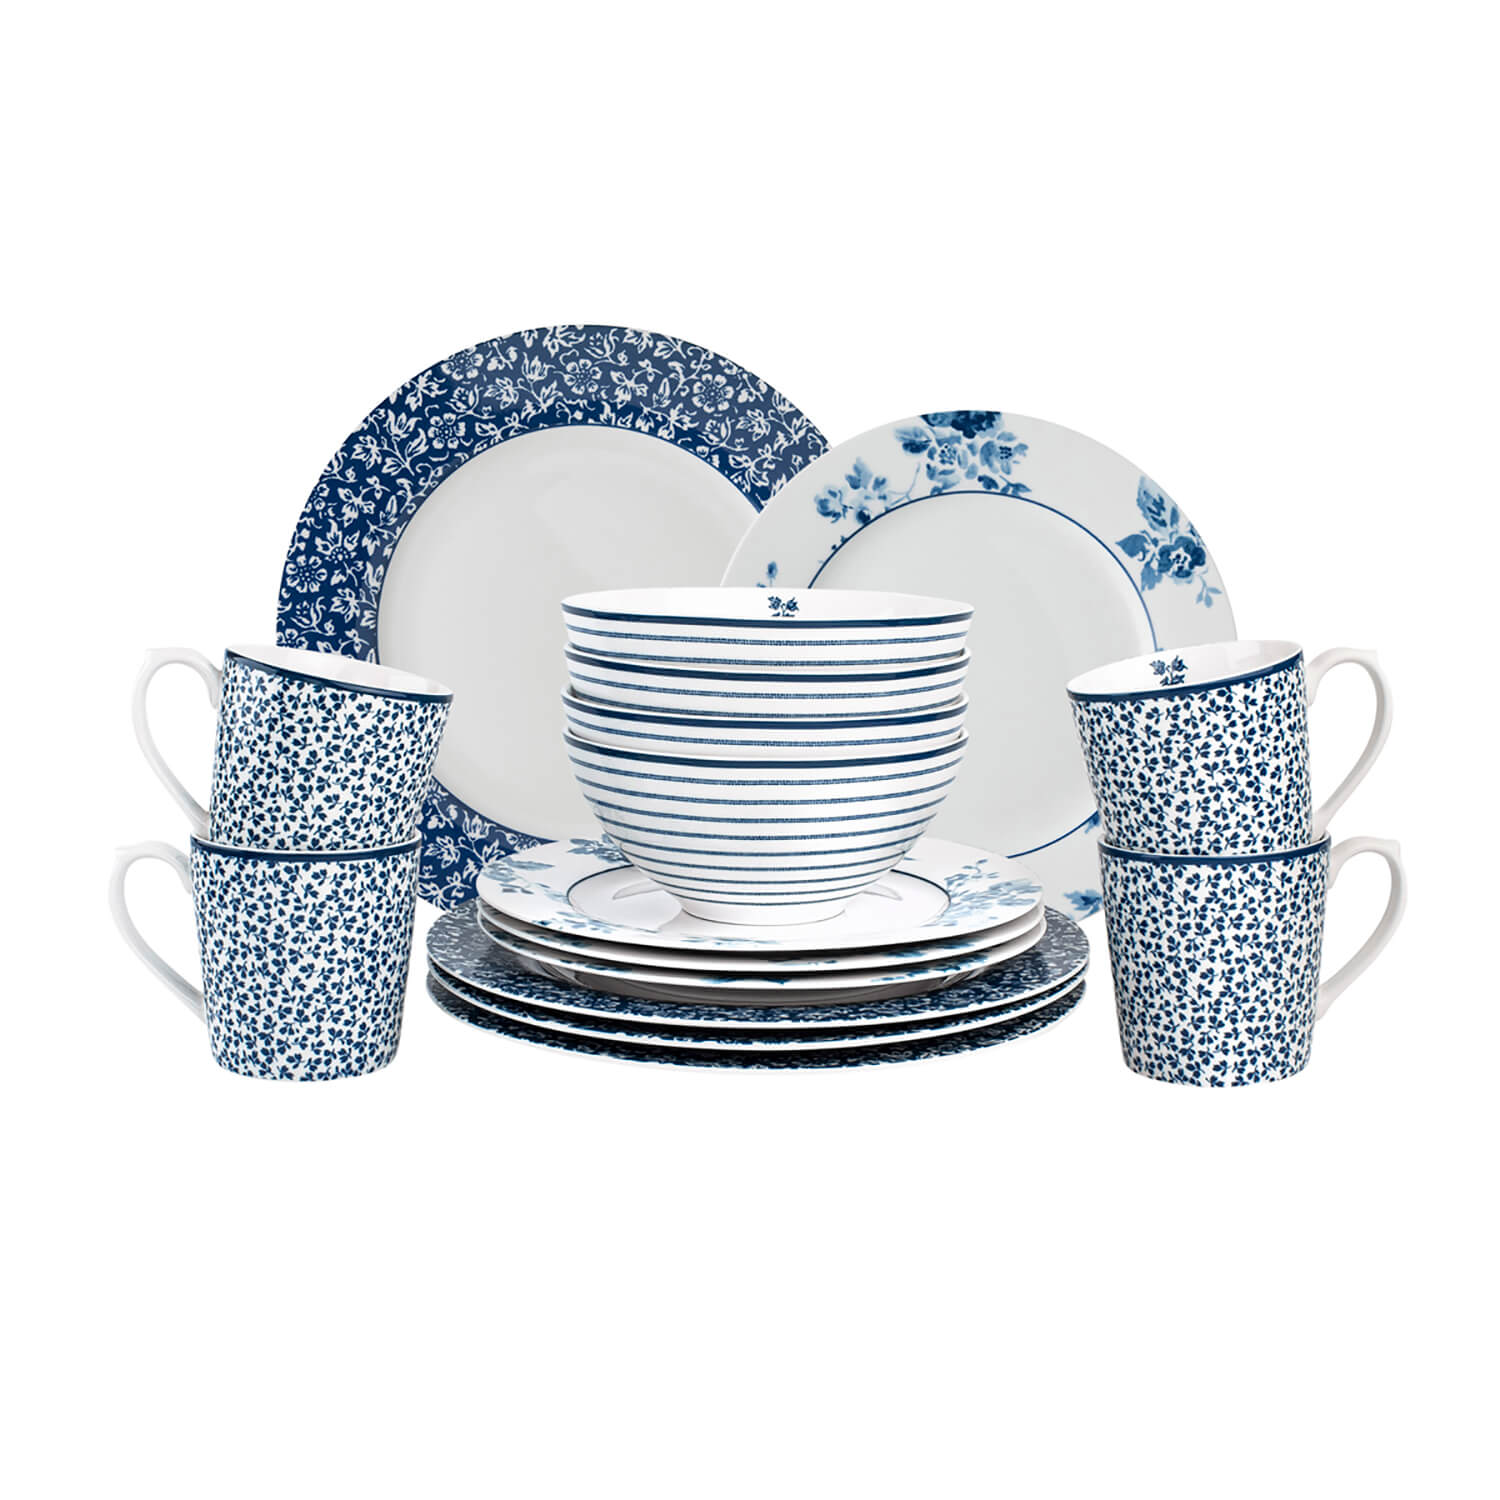 Laura Ashley Blueprint Collectables 16-Piece Tableware Giftset 5 Shaws Department Stores